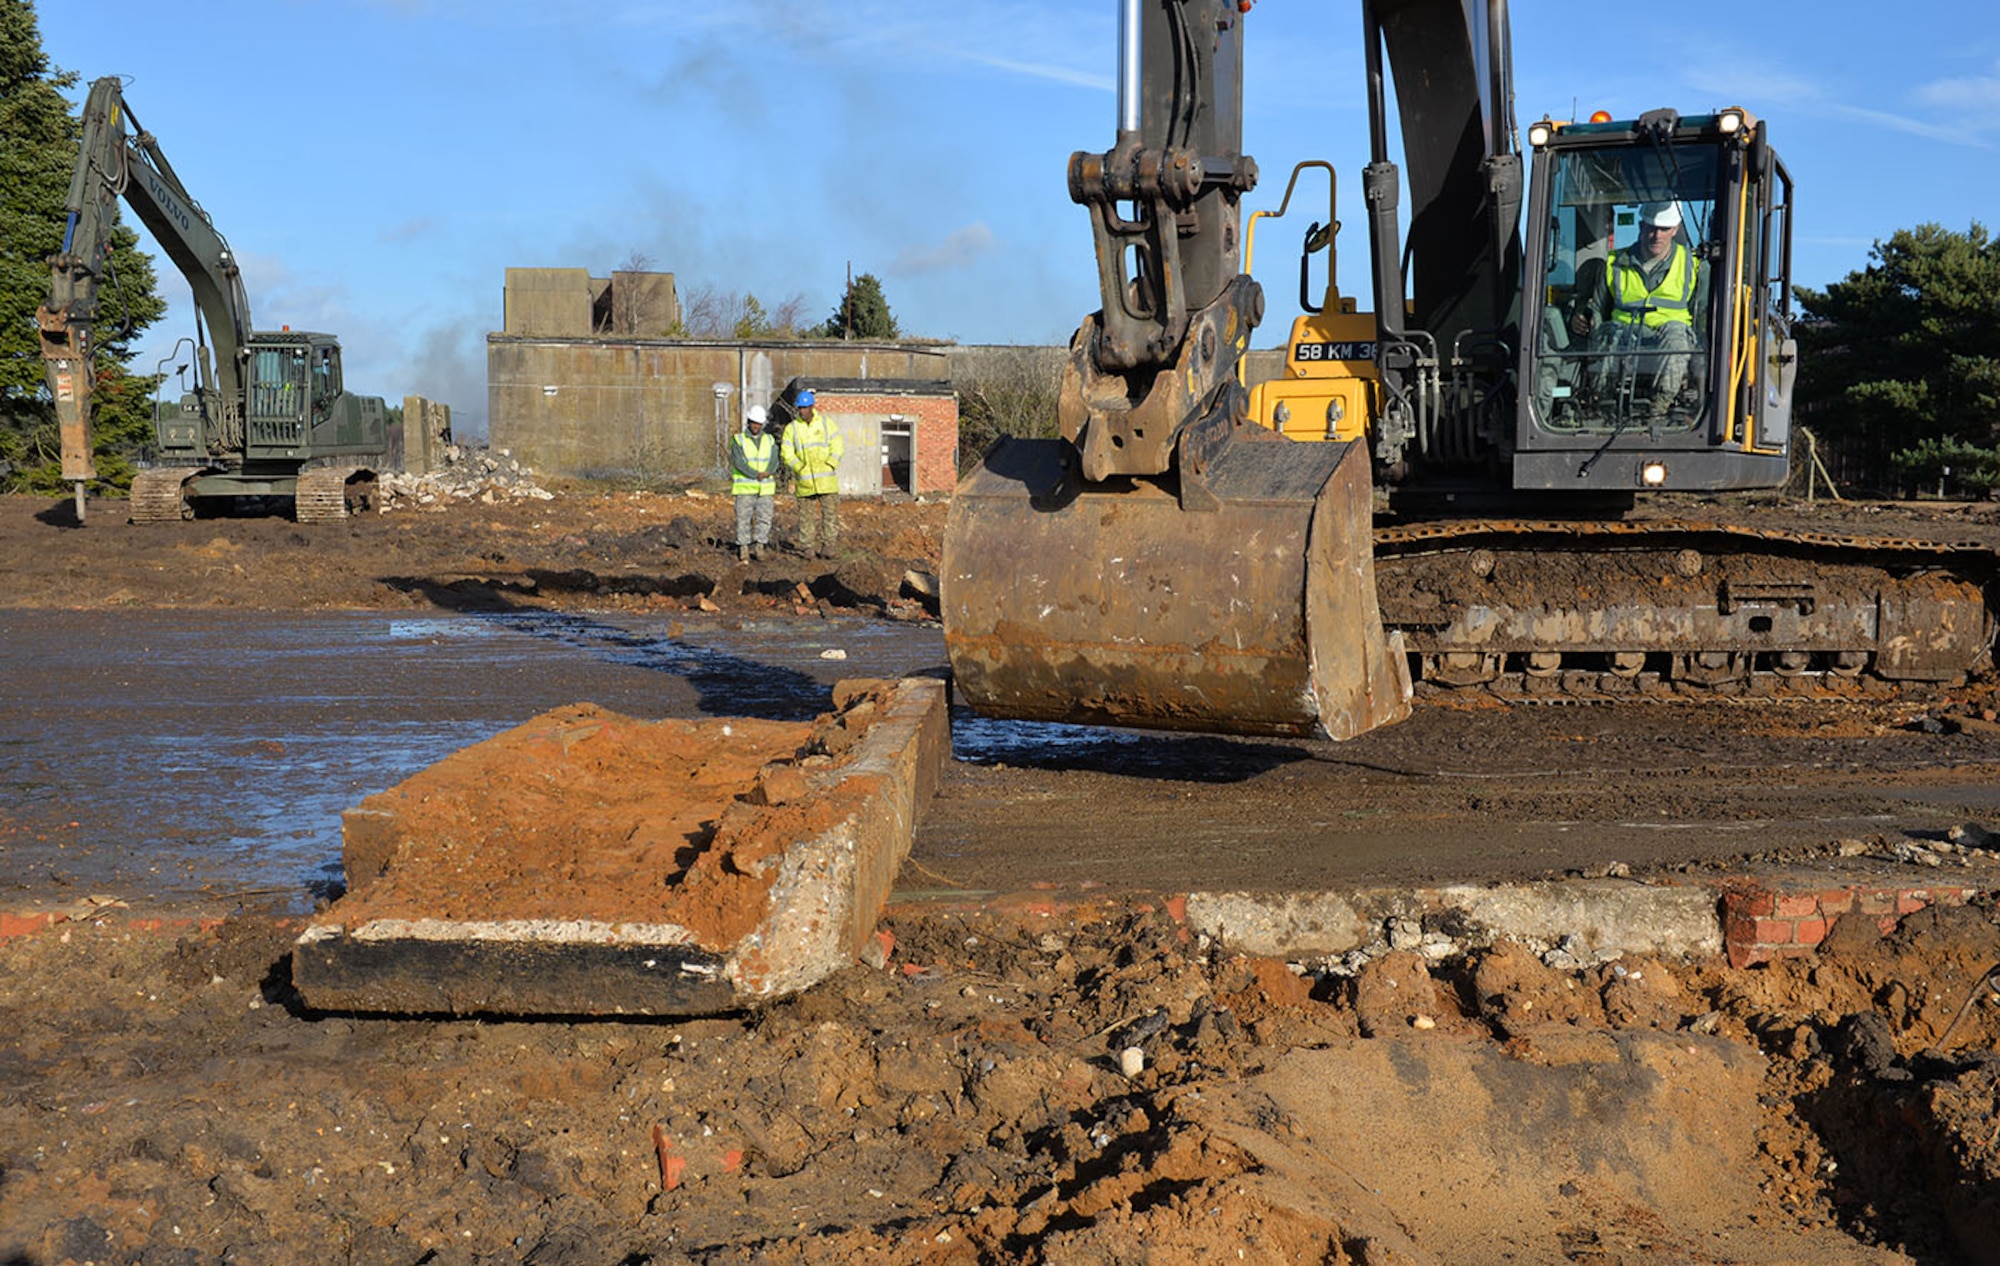 U.S. Air Force Staff Sgt. William Baynard, 100th Civil Engineer Squadron pavements and equipment supervisor, breaks up a concrete apron using a British Army excavator at Rock Barracks, Woodbridge, England, Jan. 25, 2018. The excavator followed the jack hammer – used to initially break up the concrete – and ripped up chunks of it to be hauled away. Using the equipment gave the 100th CES Airmen valuable “stick time,” which they are not easily able to get as there are no excavators at RAF Mildenhall. (U.S. Air Force photo by Karen Abeyasekere)